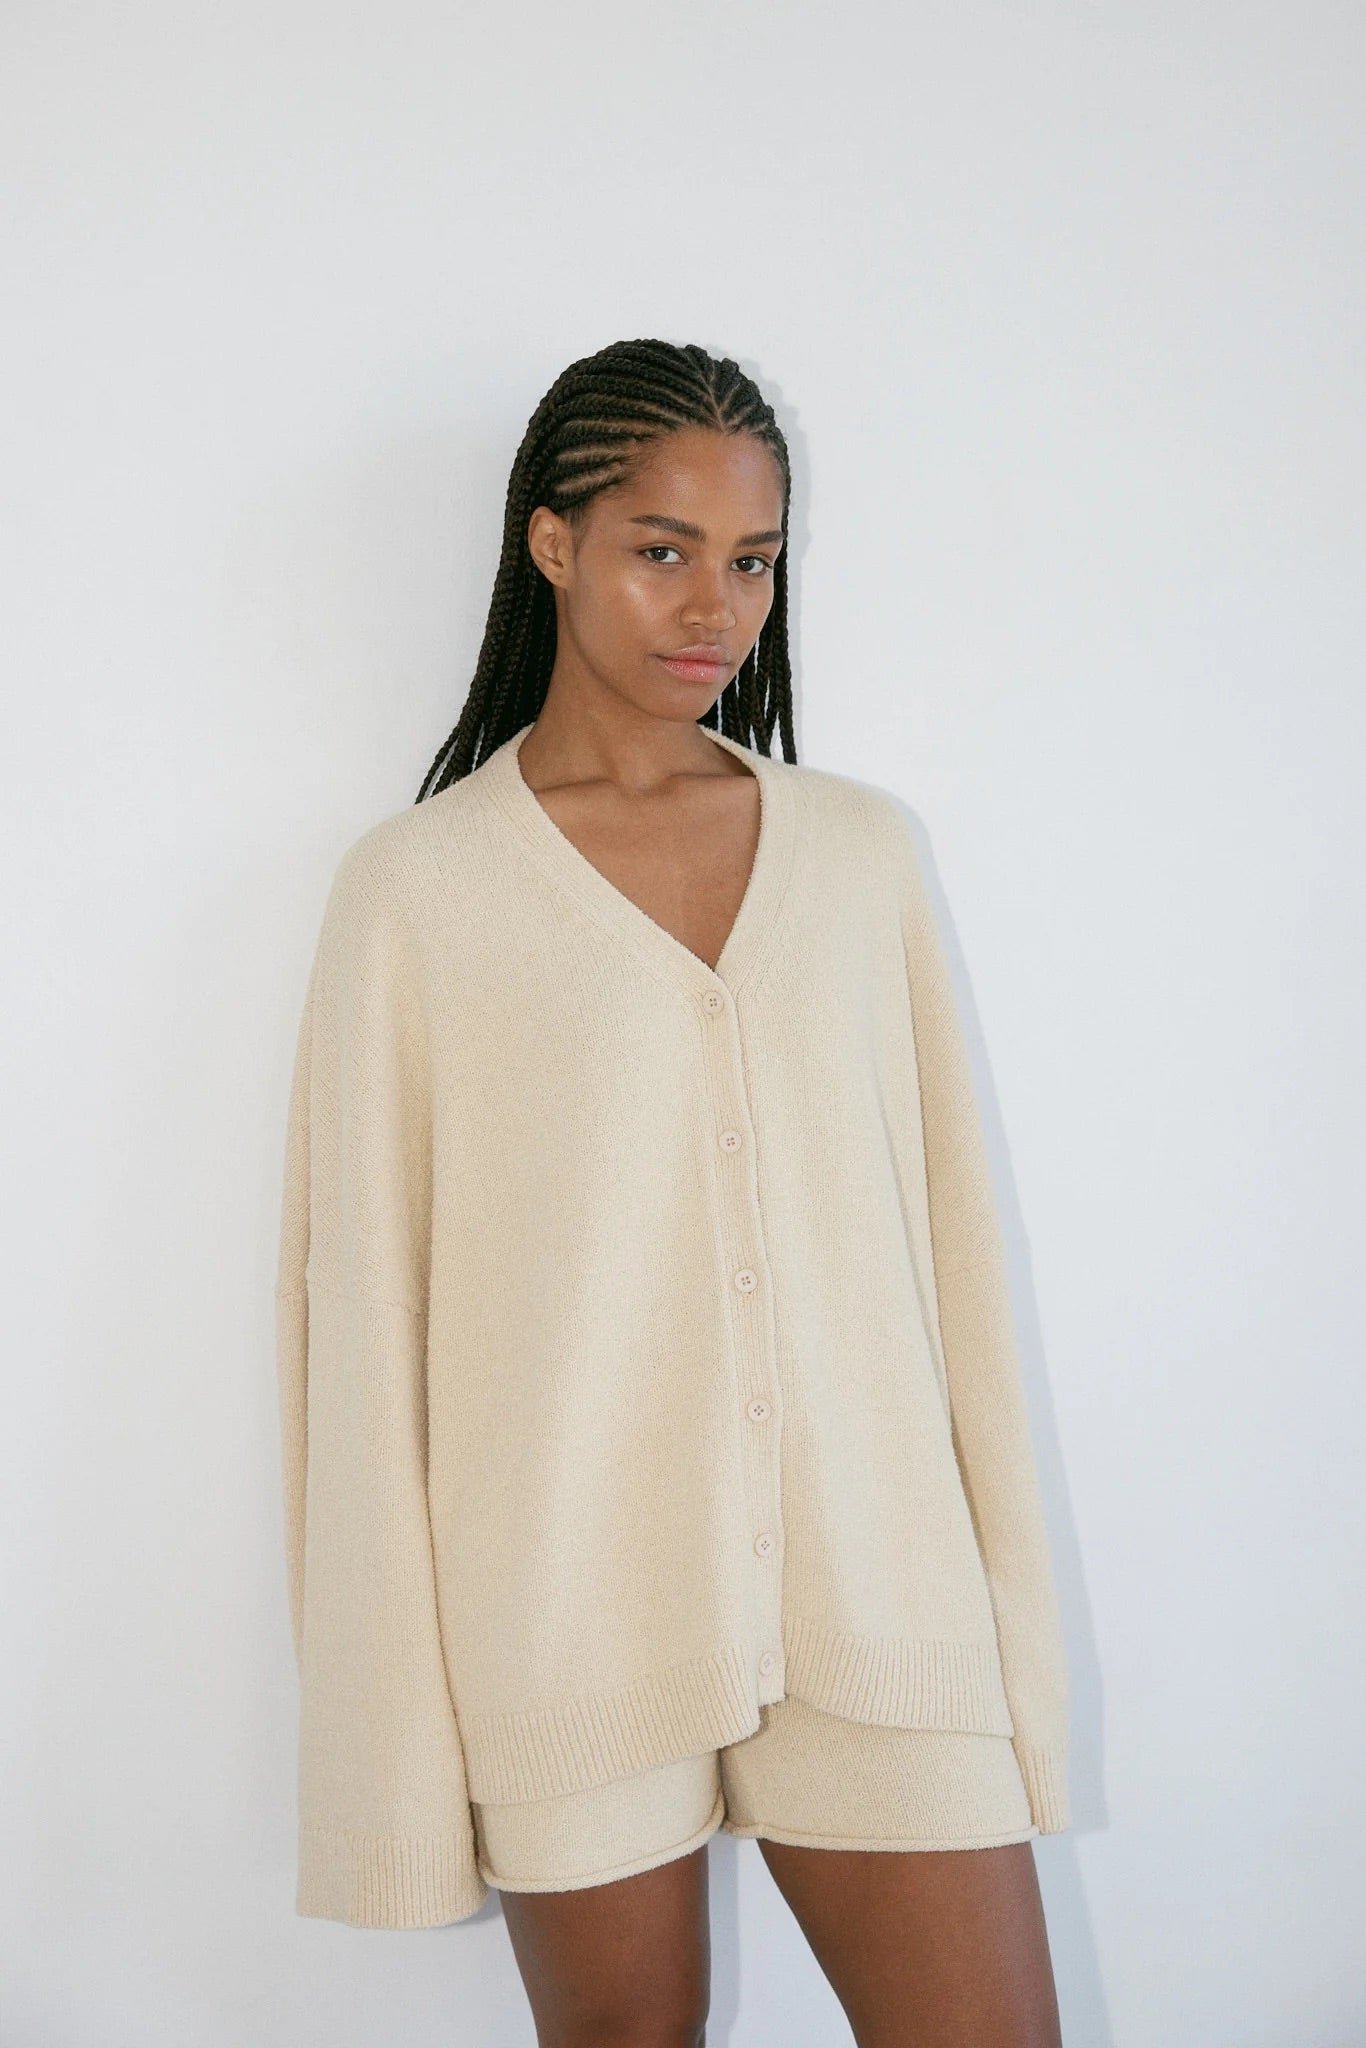 The Knit Cardigan - PRE ORDER